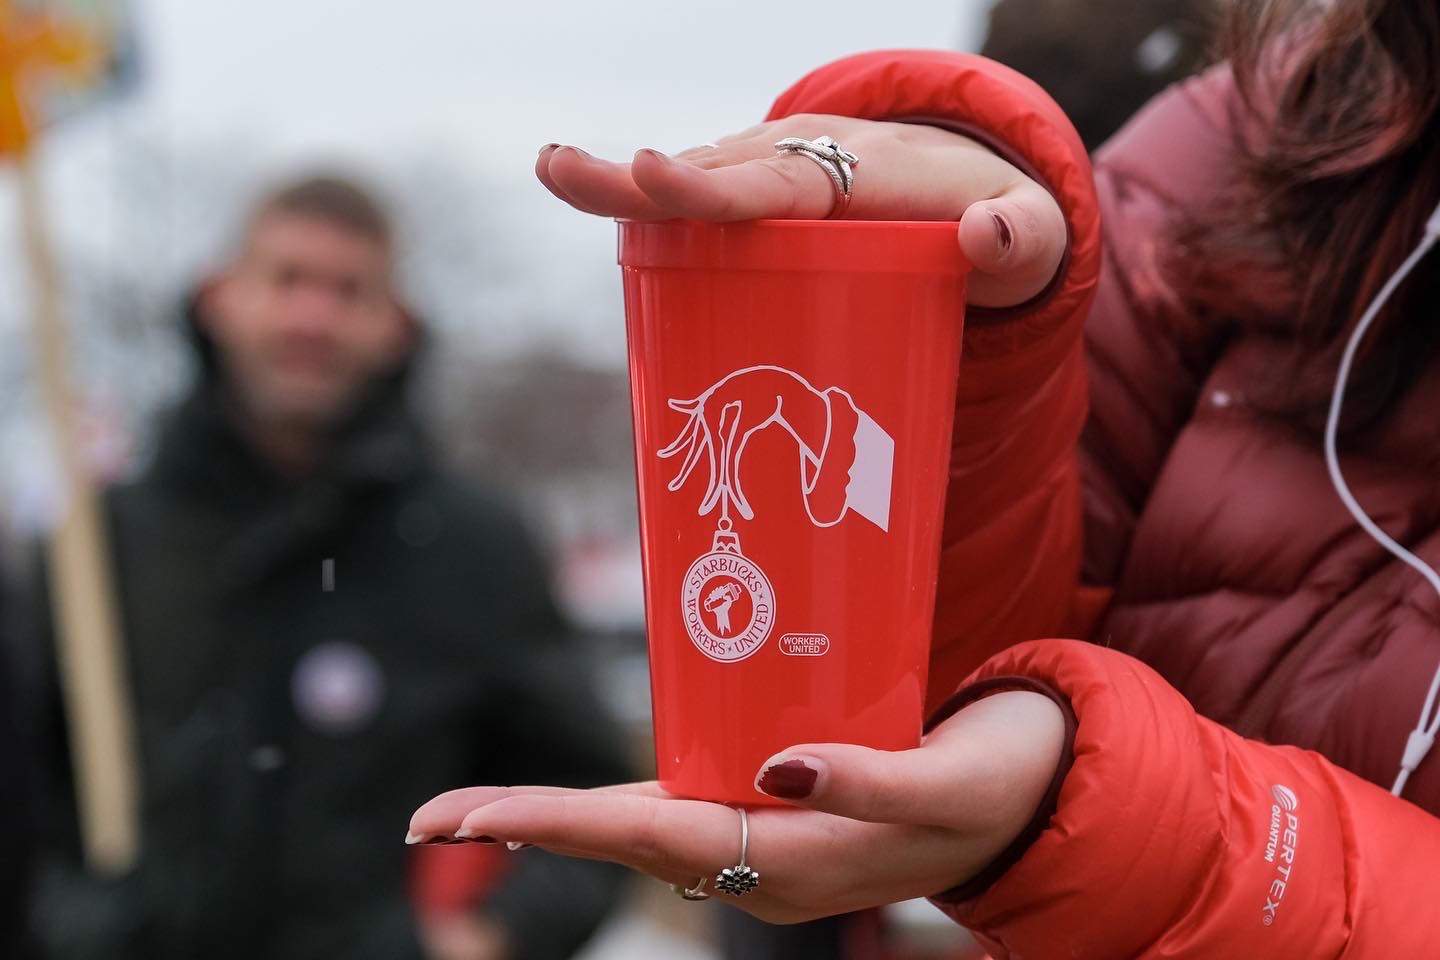 A pair of hands holds a plastic red cup emblazoned with a cartoon hand holding a Christmas ornament that features the Starbucks Workers United union logo.